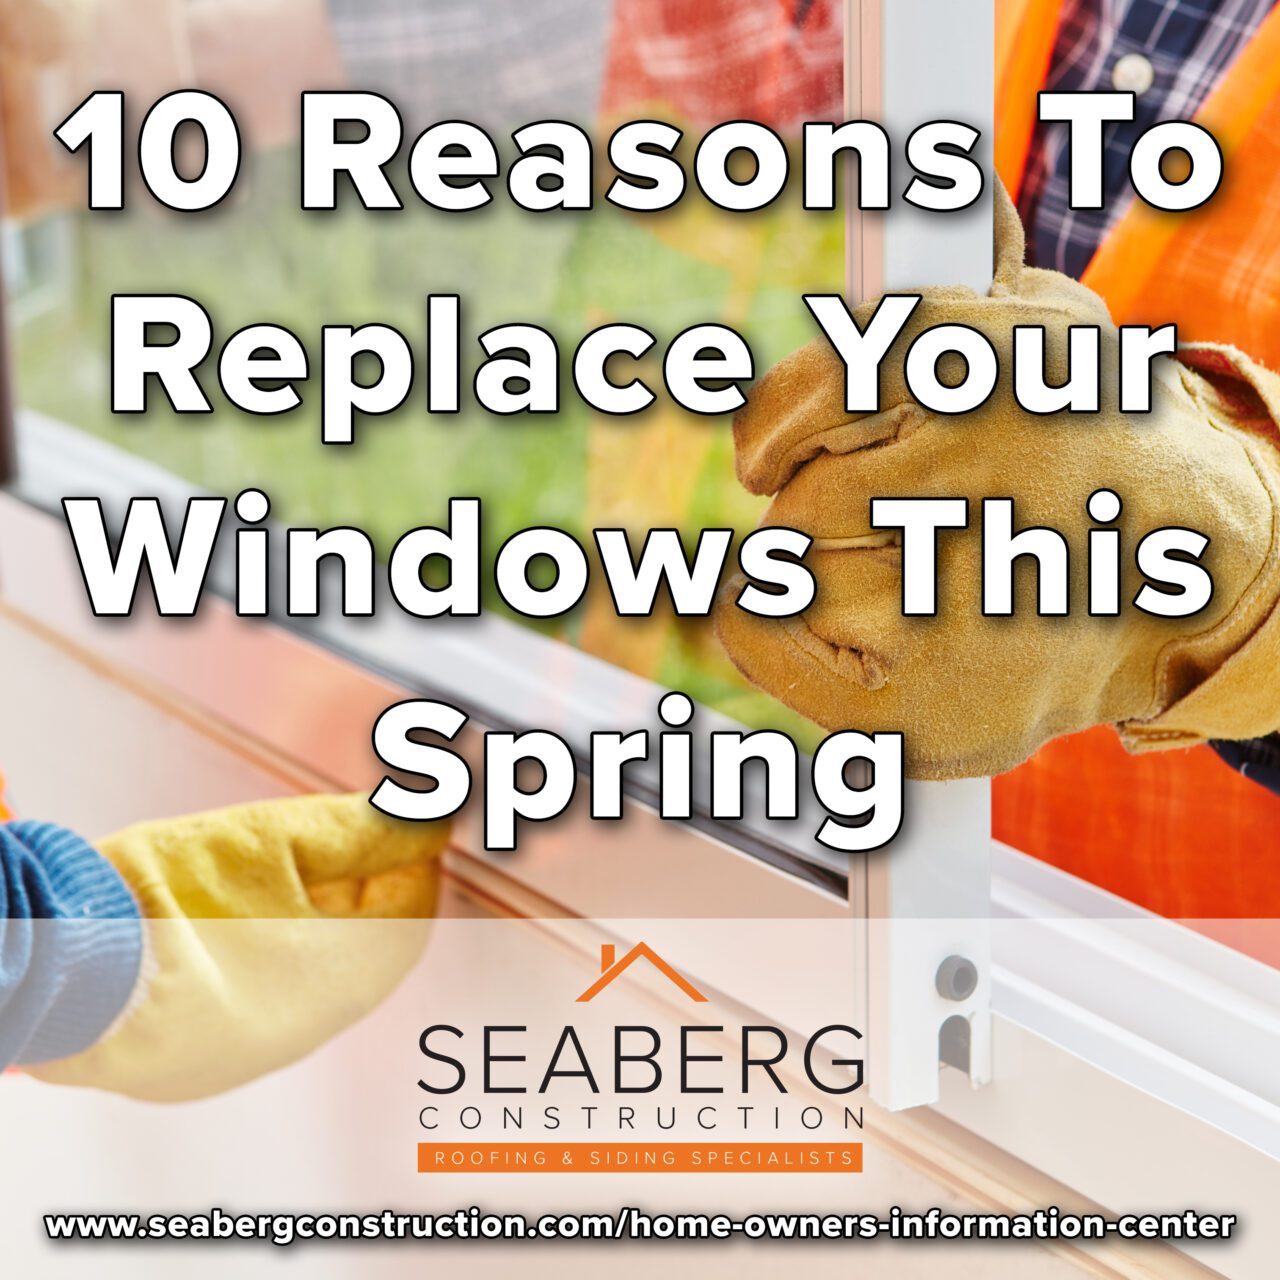 Seaberg Construction Blog - 10 Reasons To Replace Your Windows This Spring